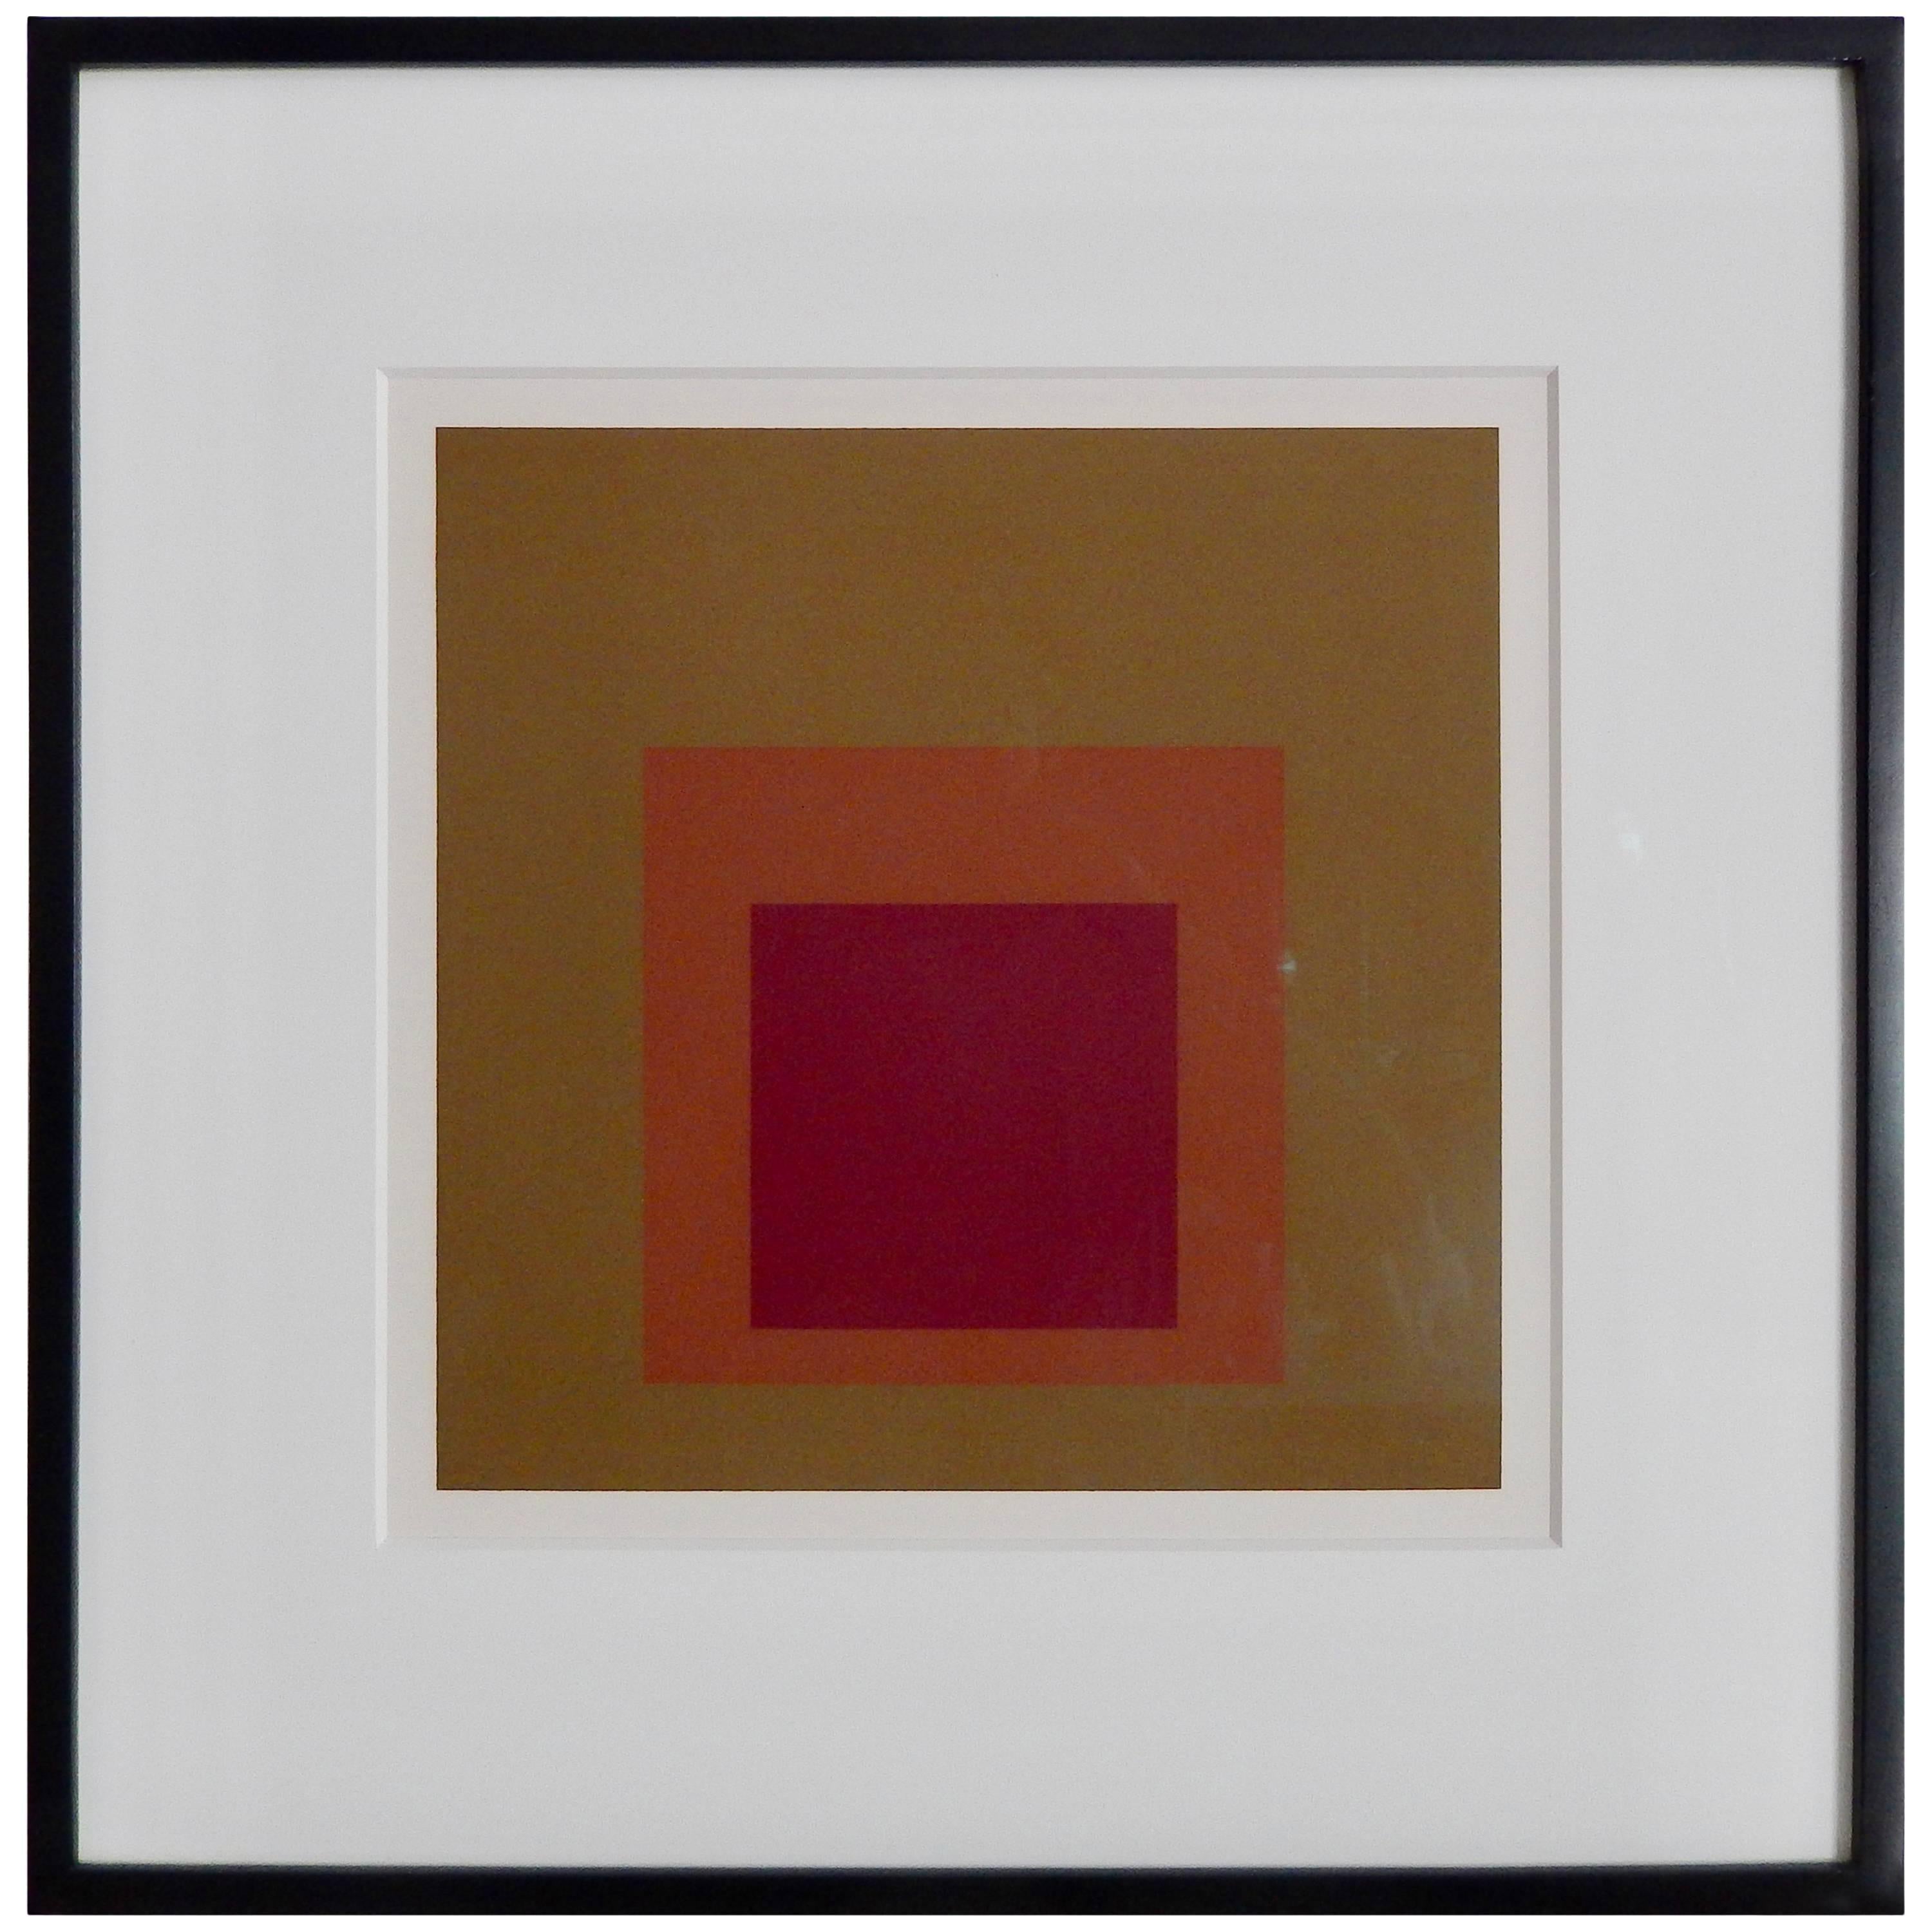 Joseph Albers Screen Print "Equivocal" from Homage to the Square Portfolio, 1962 For Sale